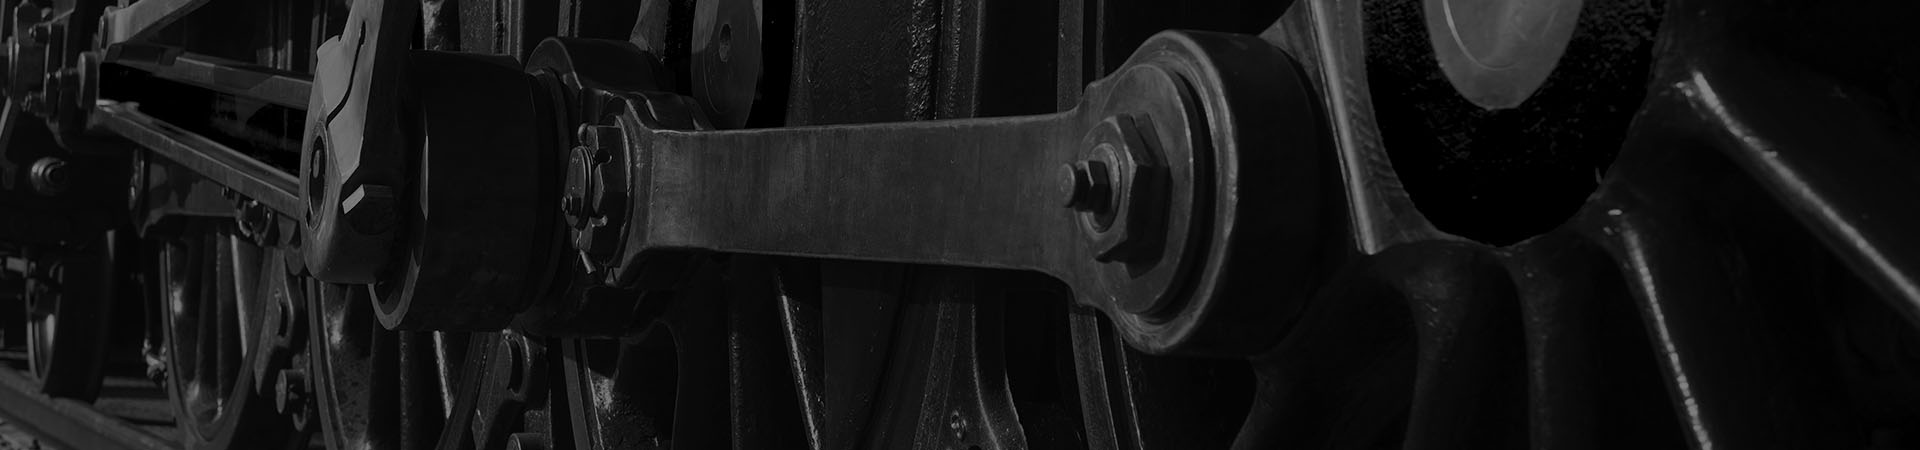 Detail photo of the wheels of a locomotive